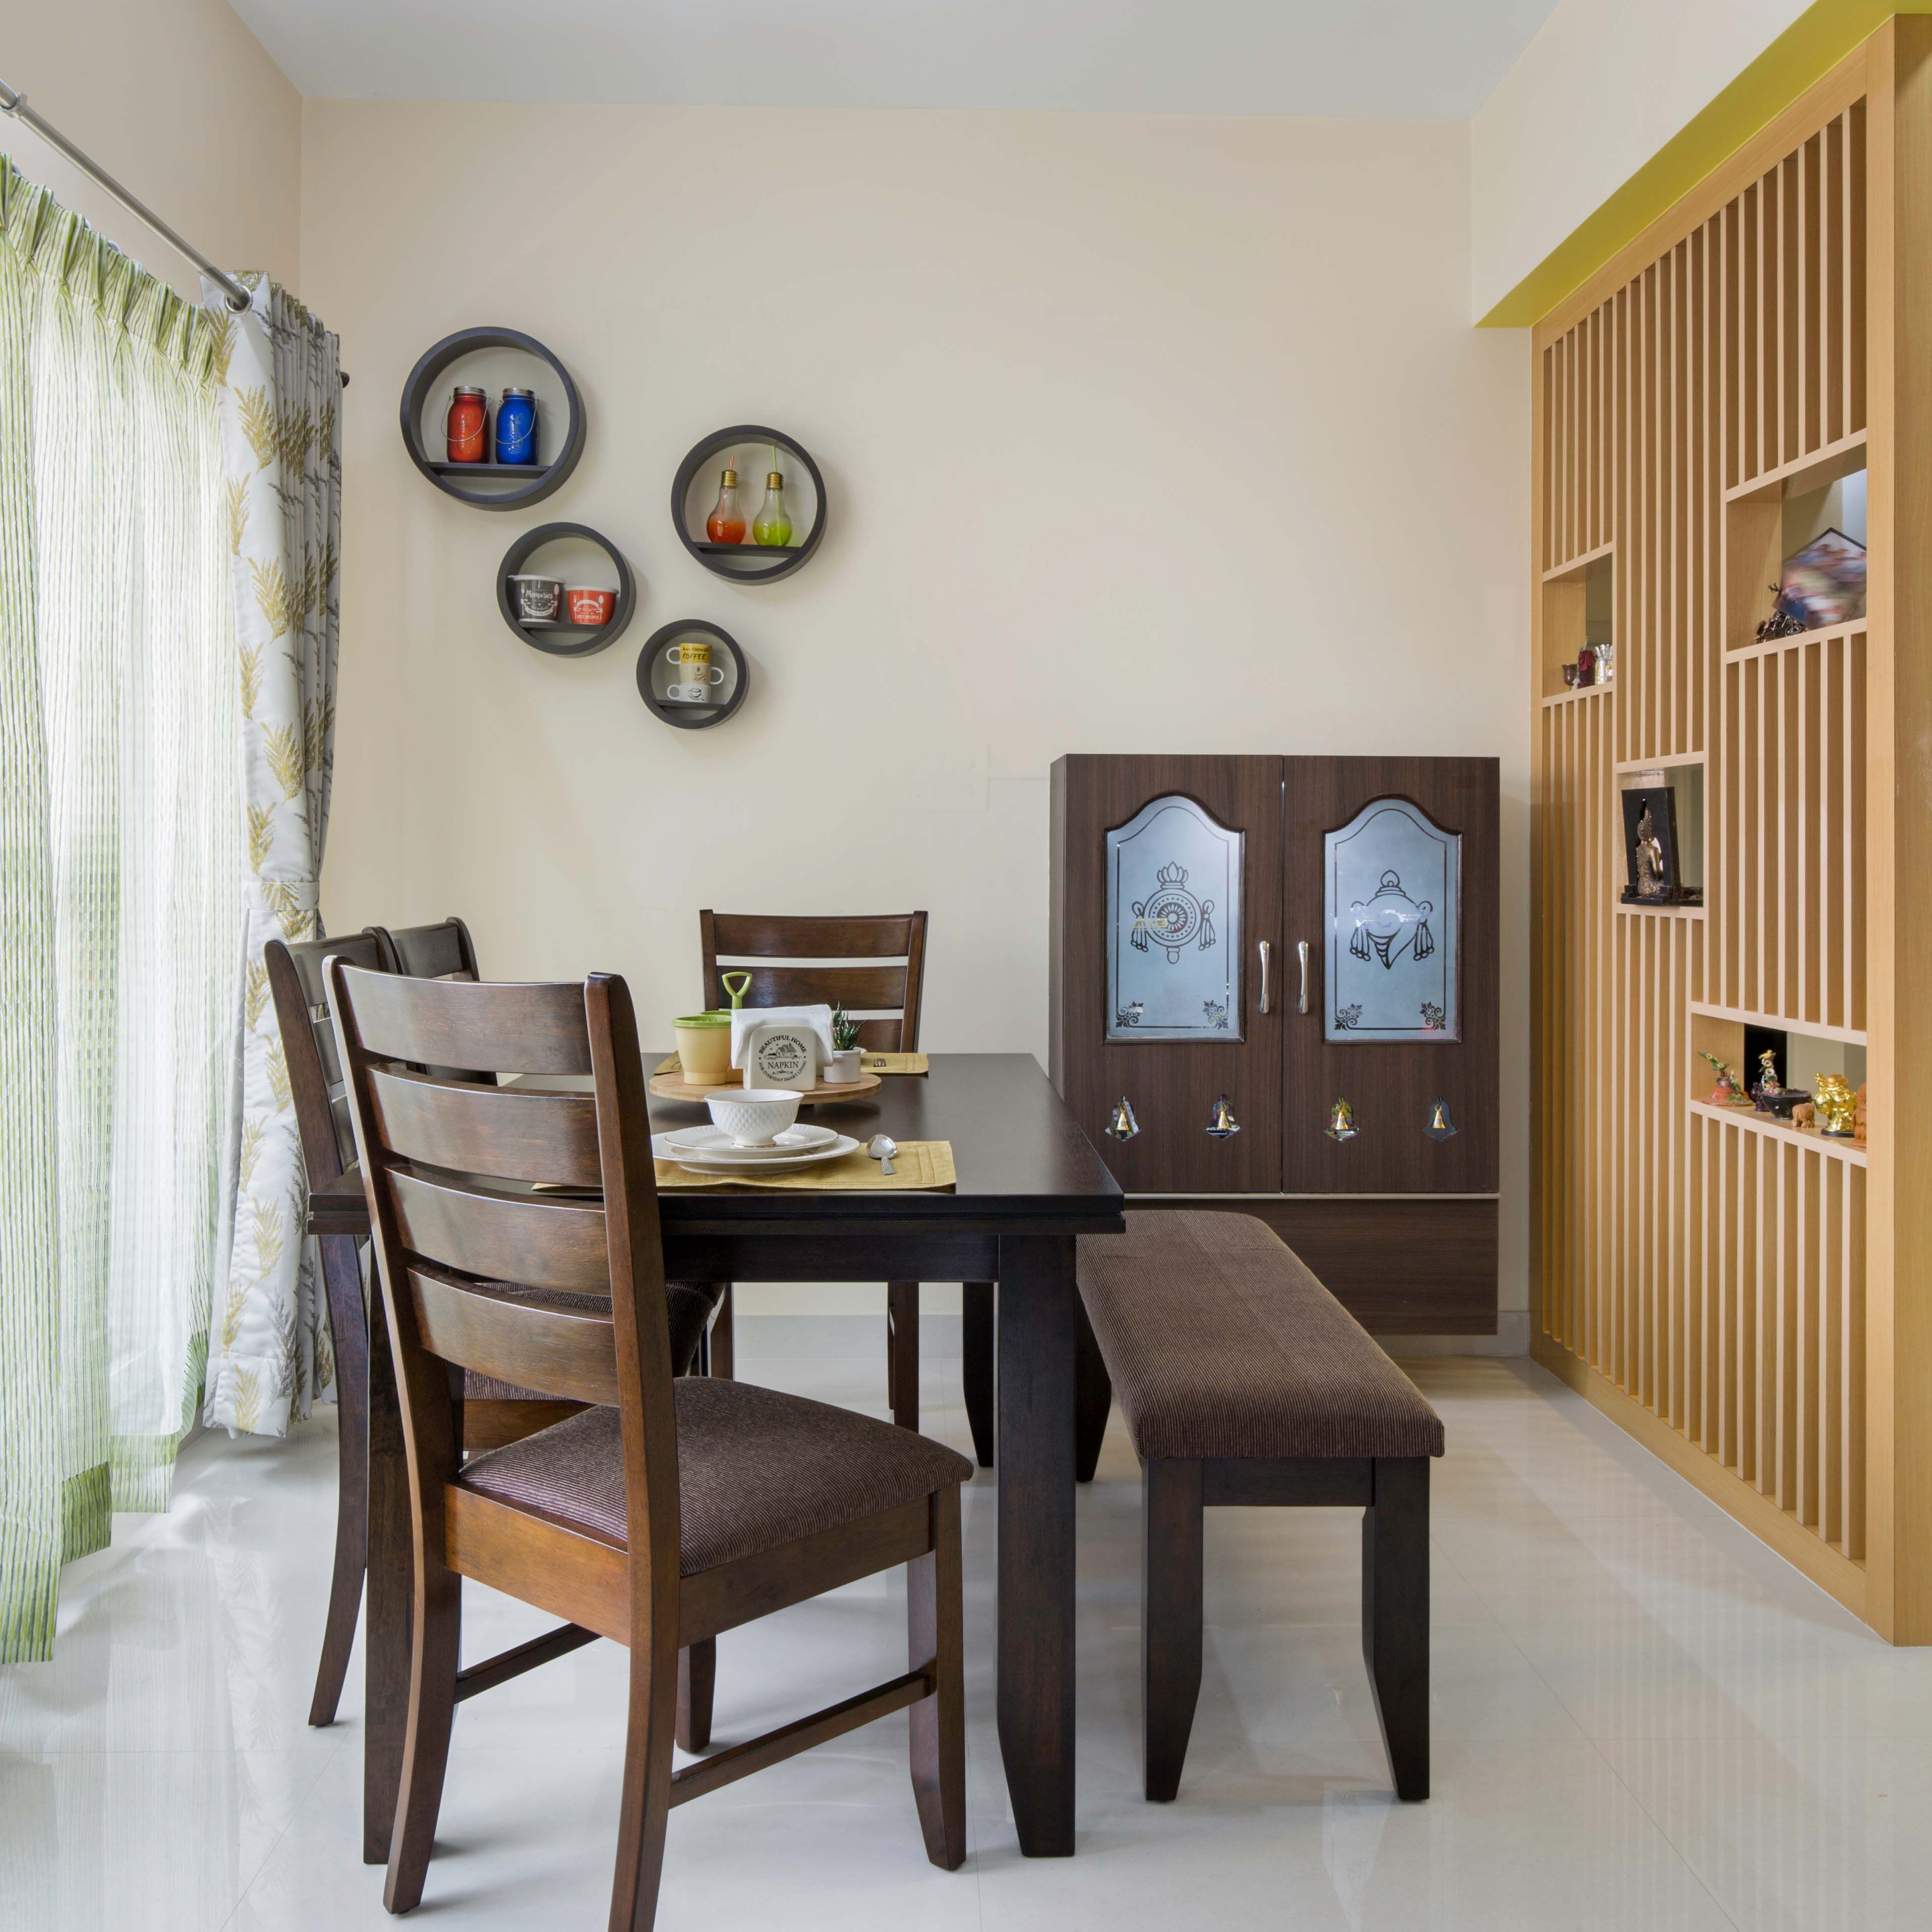 Classic 4-Seater Wooden Dining Room Design With Brown Bench And Integrated Wooden Mandir Unit